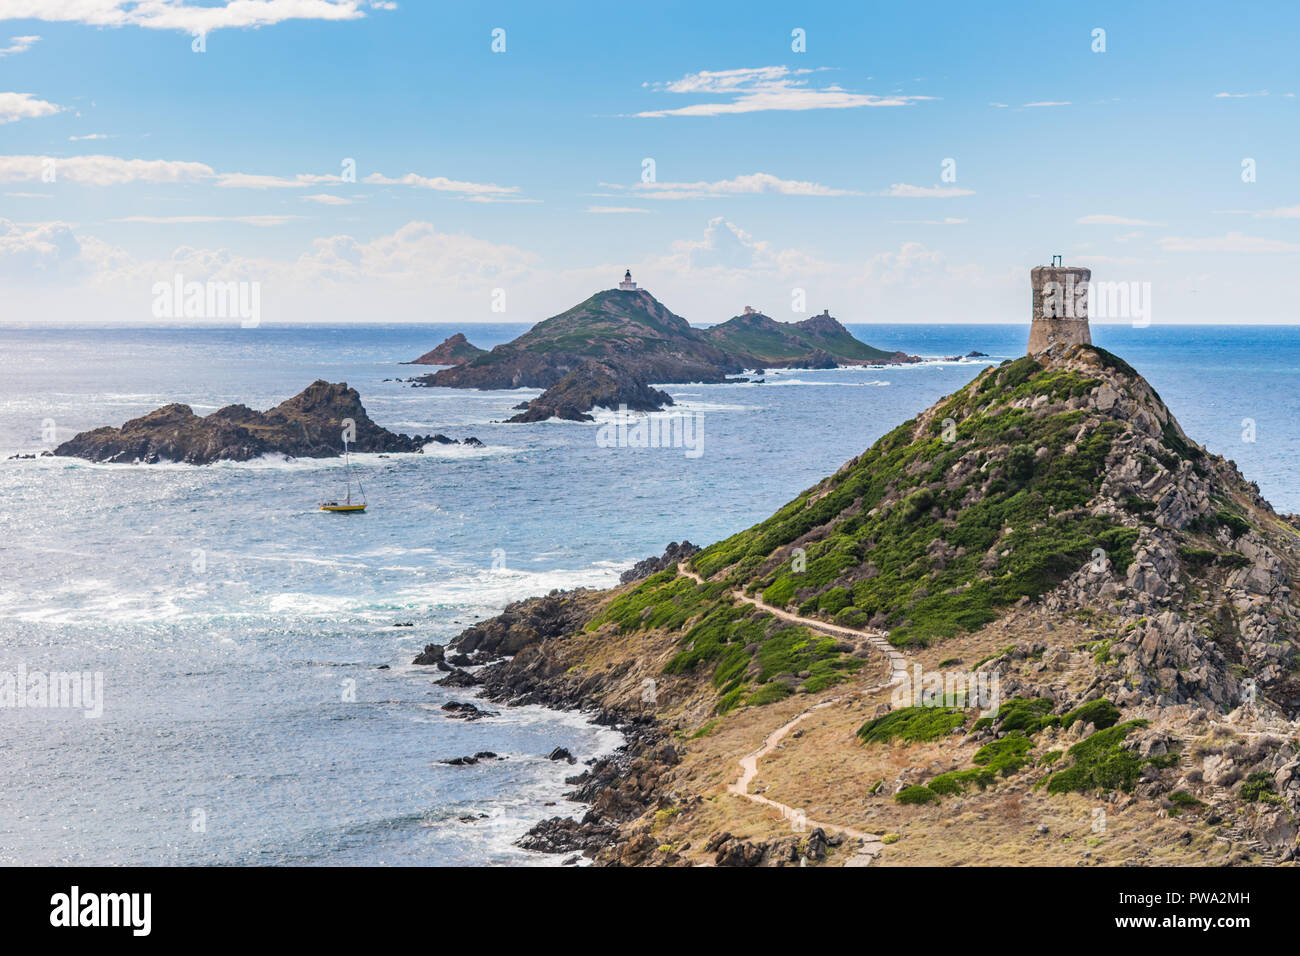 View of Pointe de la Parata on the west coast of Corsica. A ruined Genoese tower sits on top of the rocky promontory overlooking the Sanguinaires. Stock Photo